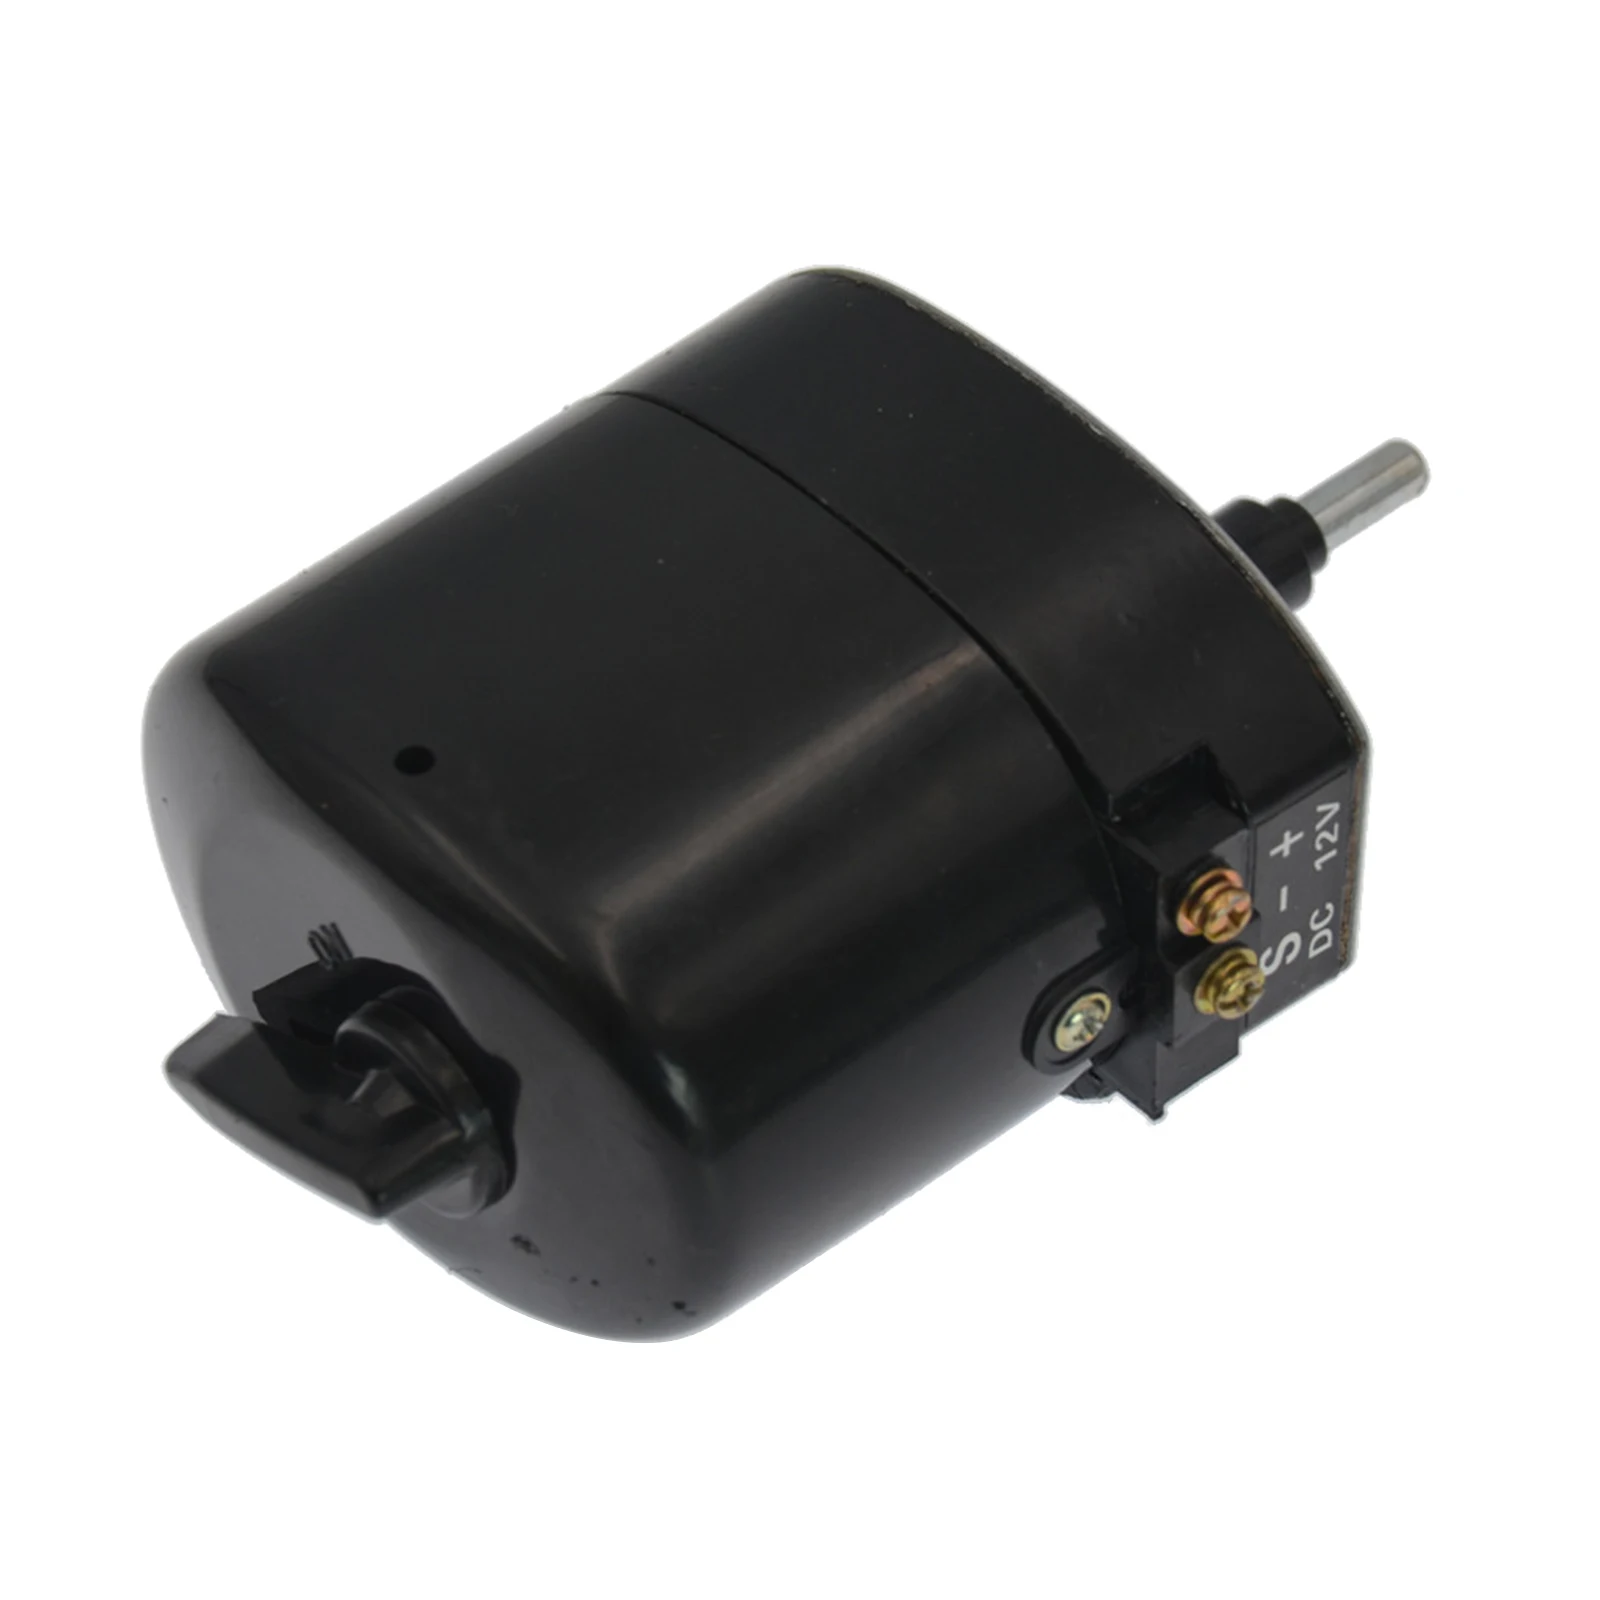 Wiper Motor - Car Auto Windshield Windscreen Wiper Motor Compatible with Willys Jeep Tractor 01287358 7731000001 12V